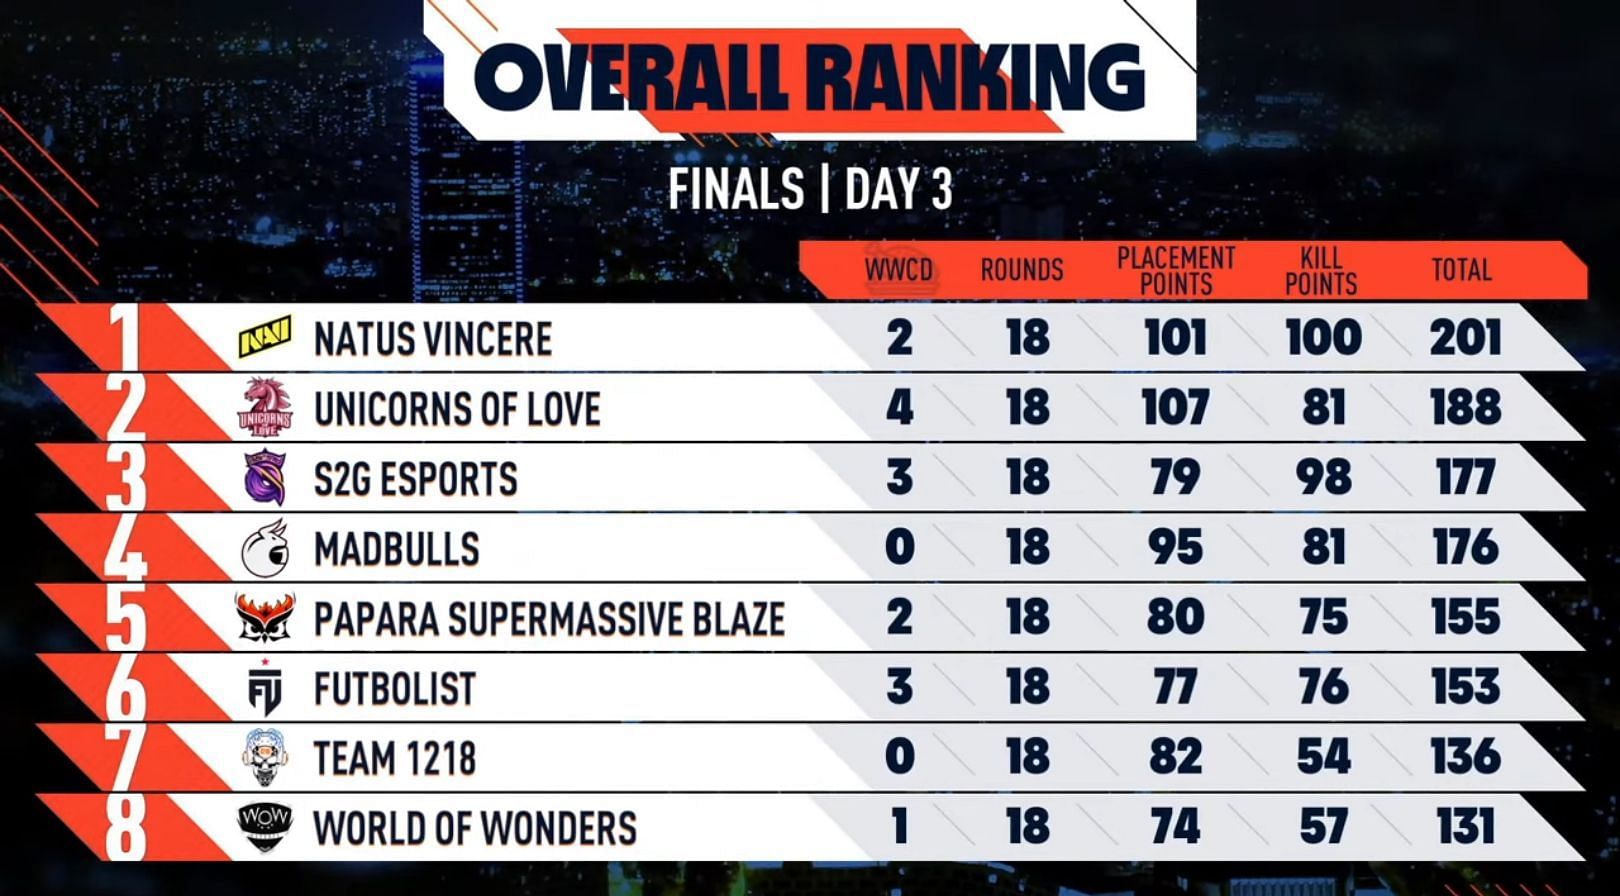 Natus Vincere leads overall leaderboard after PMPL European Championship Day 3